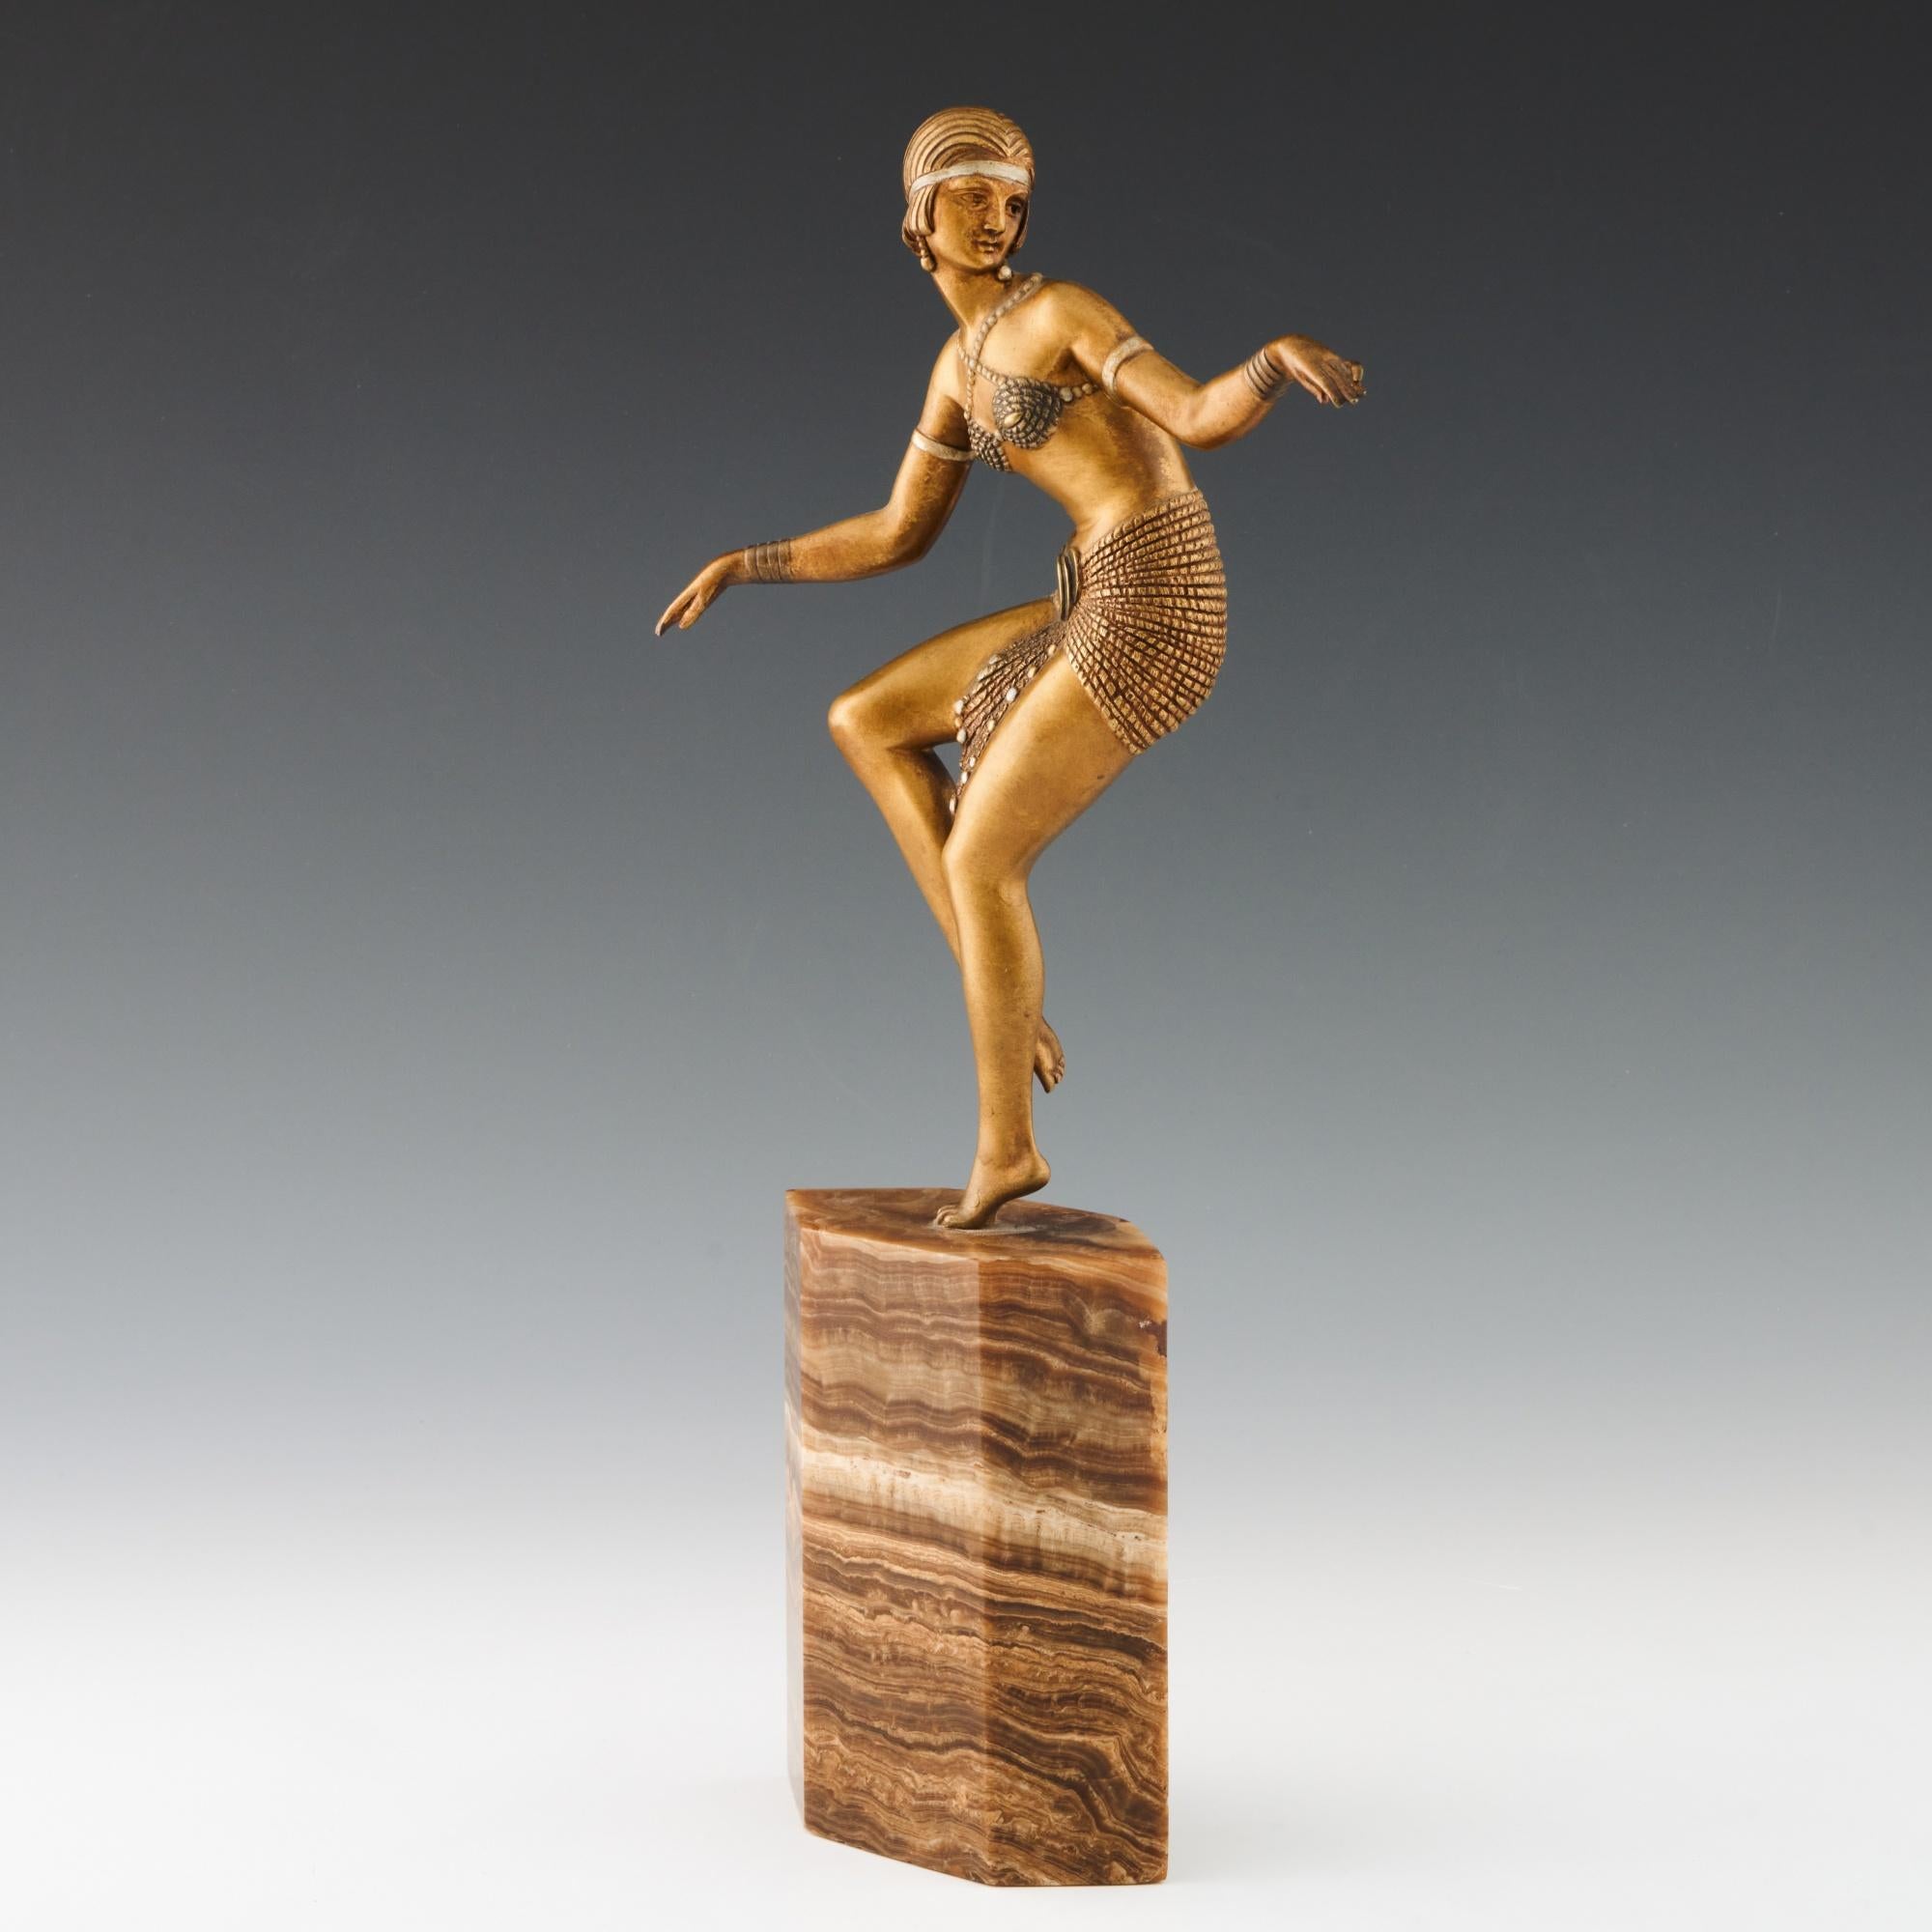 Delhi Dancer' an Art Deco cold painted gilt bronze figure by Demetre Chiparus (1886-1947). An athletic dancer dressed in scantily clad theatrical costume with arms outstretched caught in motion with one leg raised. Excellent hand finished detail and